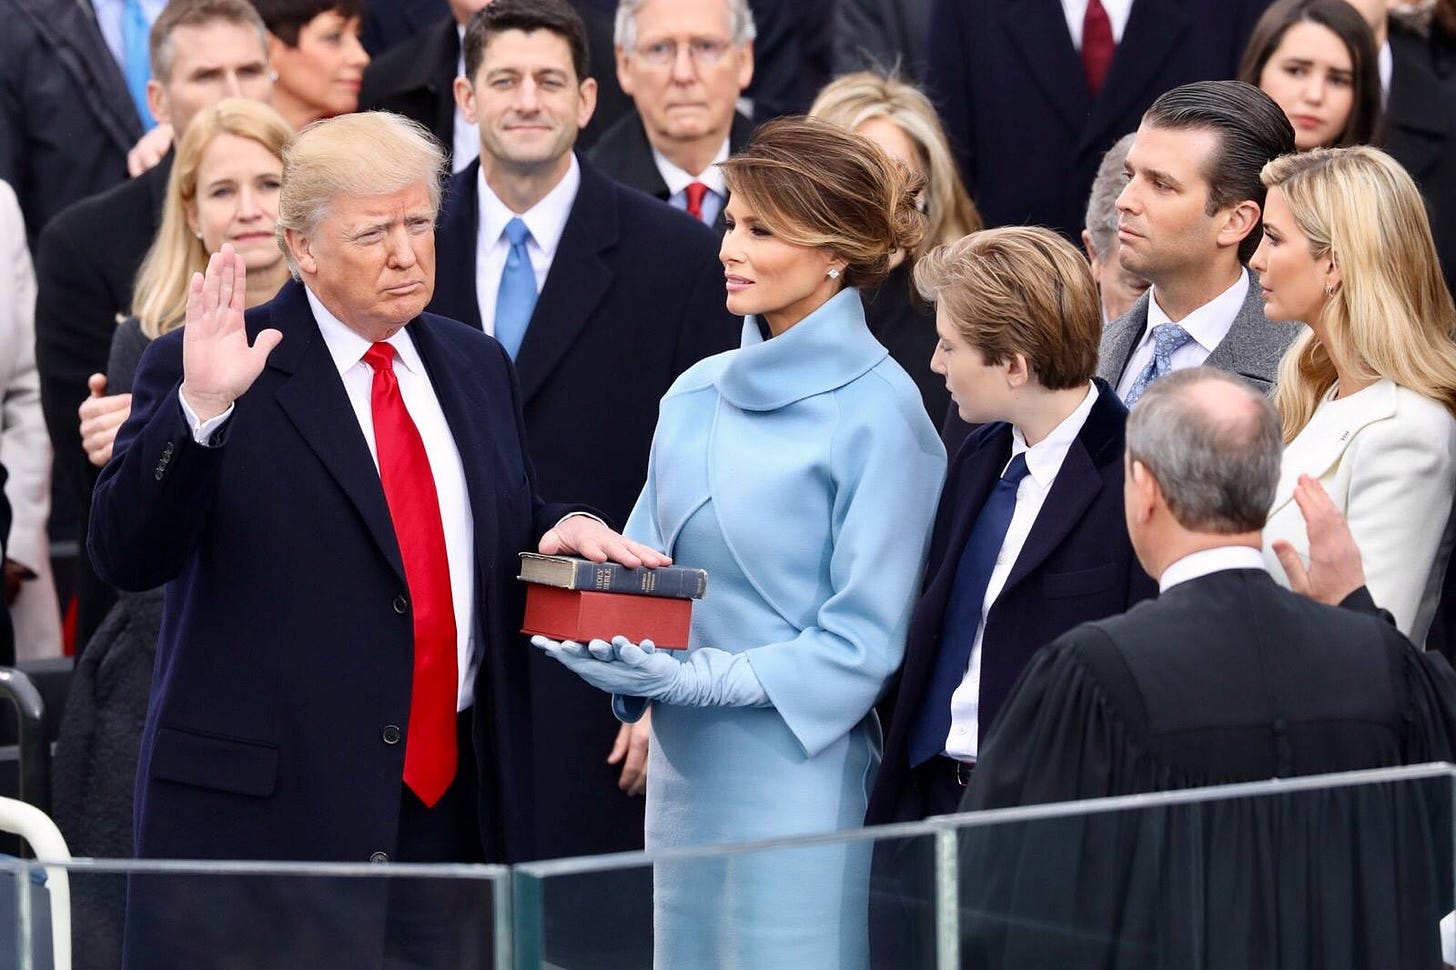 Trump, with his family watching, raises his right hand and places his left hand on the Bible as he takes the oath of office. Roberts stands opposite him administering the oath.